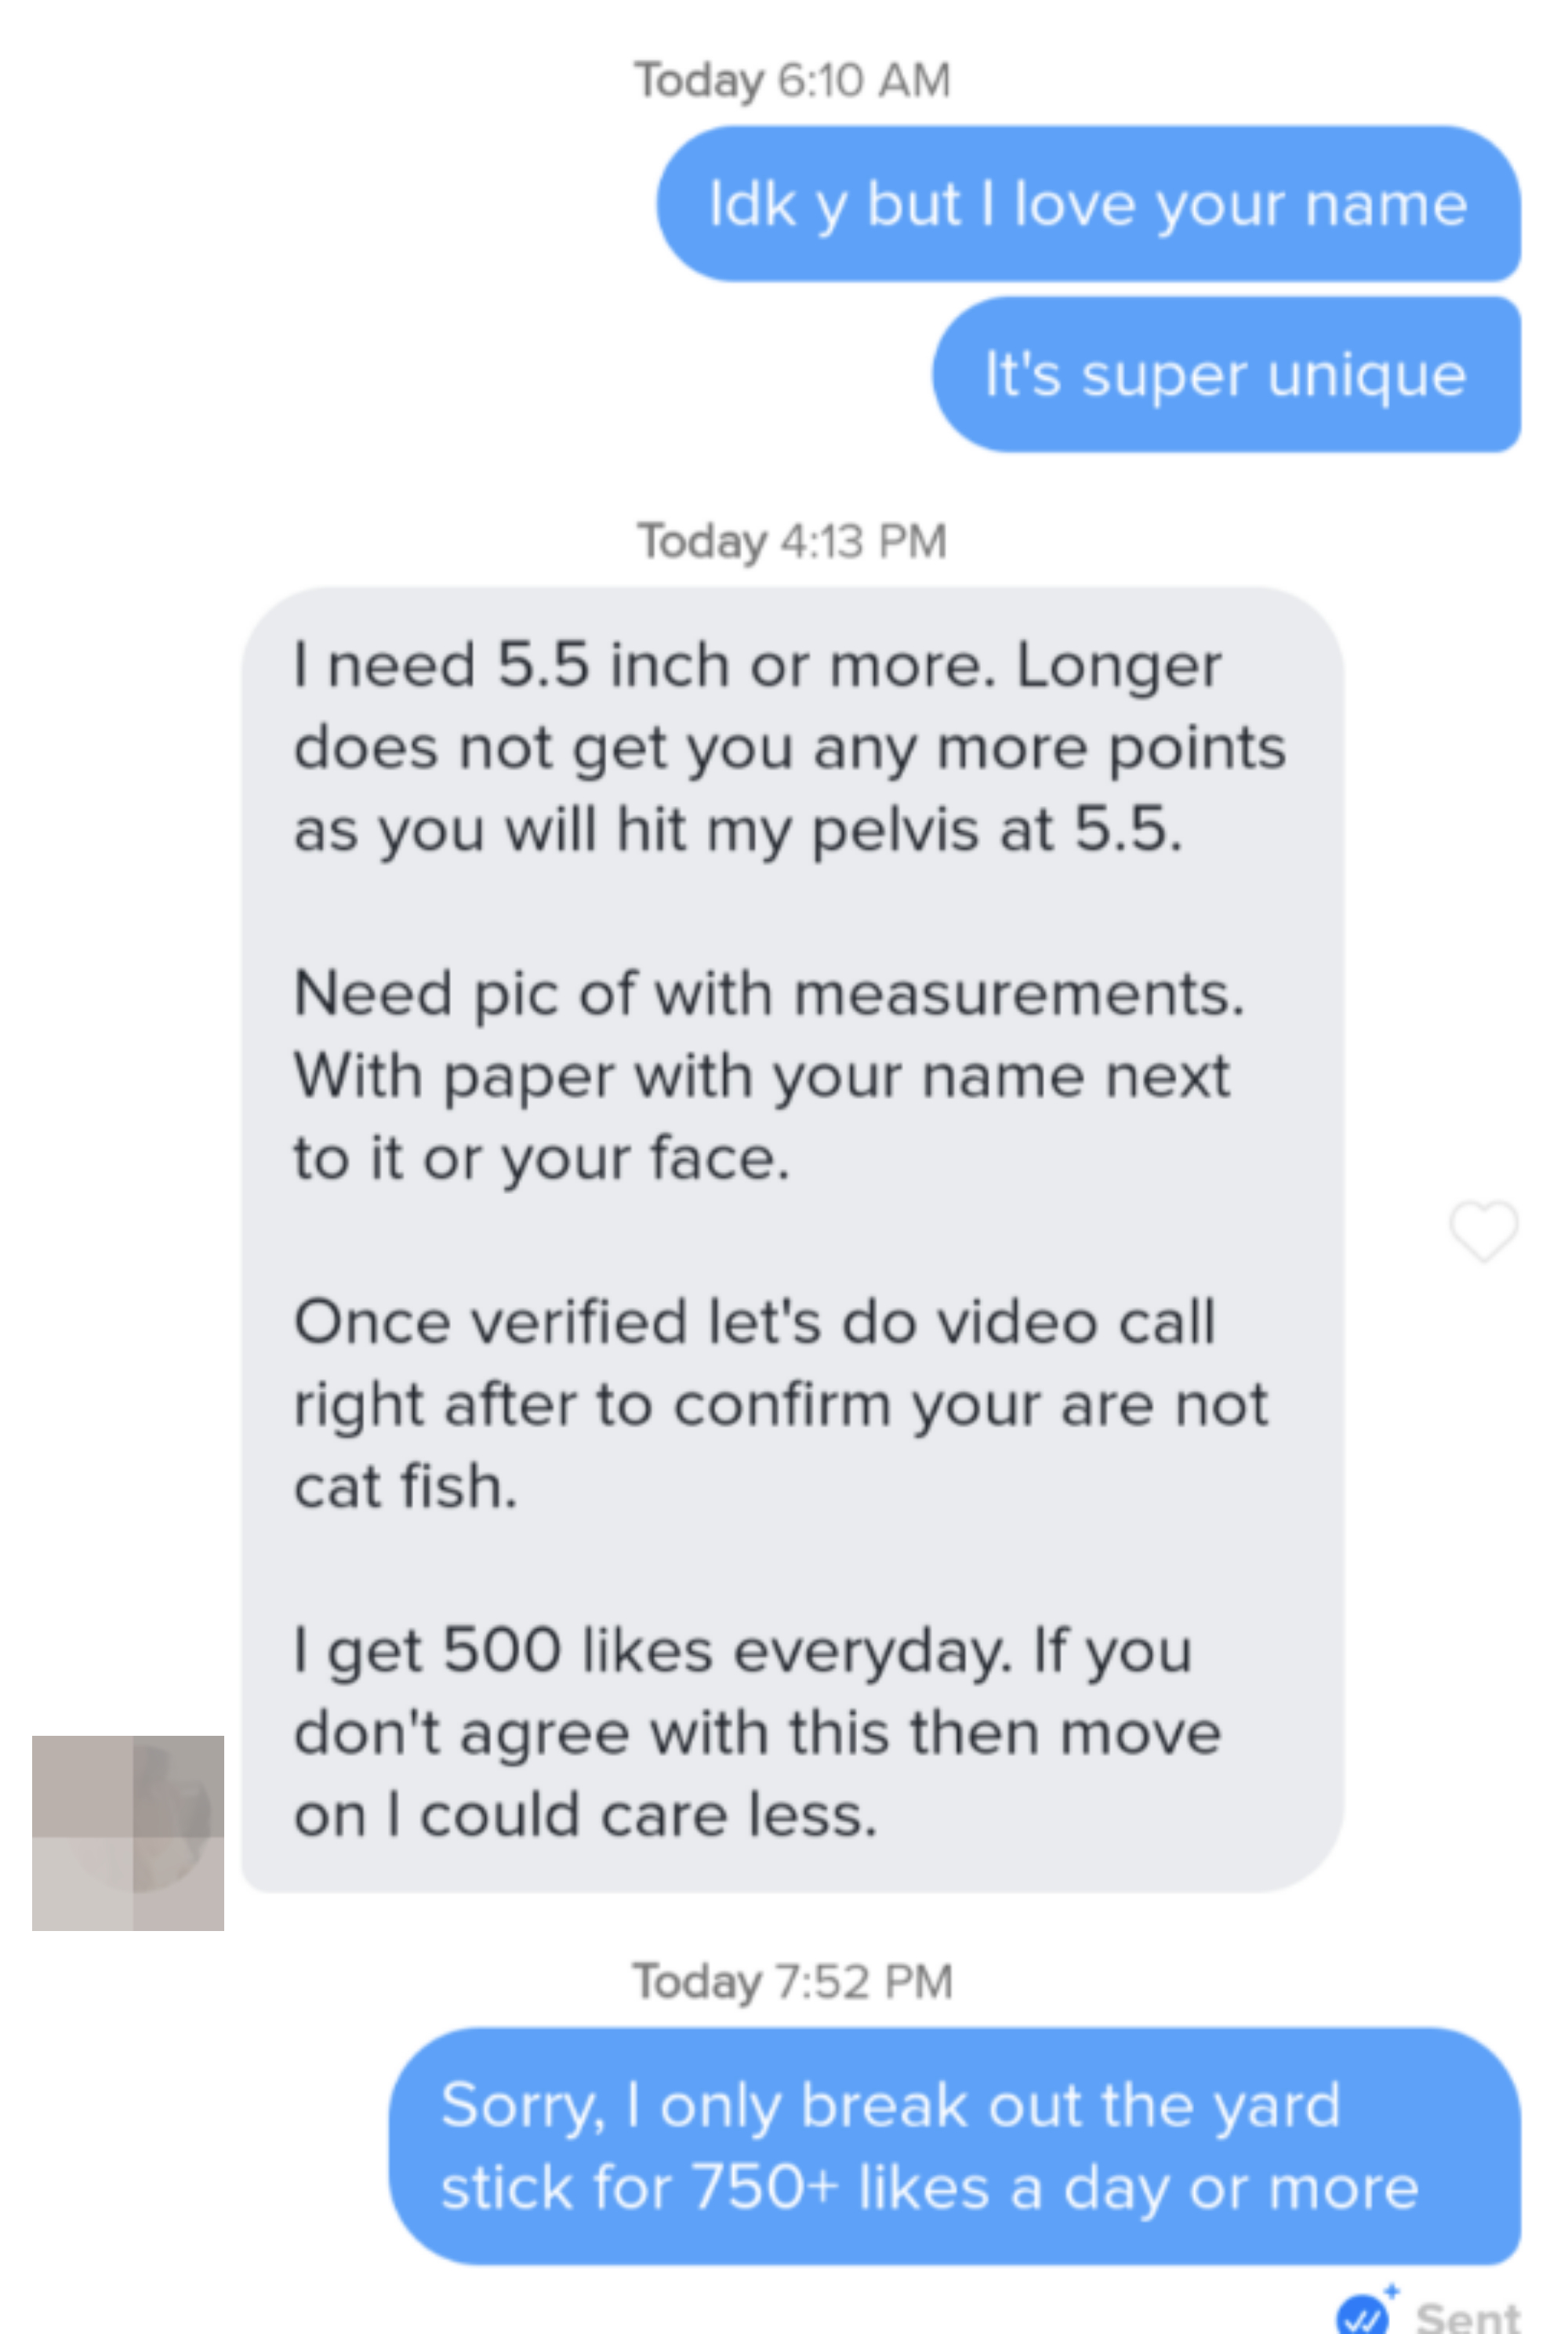 person saying they need person&#x27;s measurements sent, a photo with their name and a video chat so they&#x27;re not being cat fished